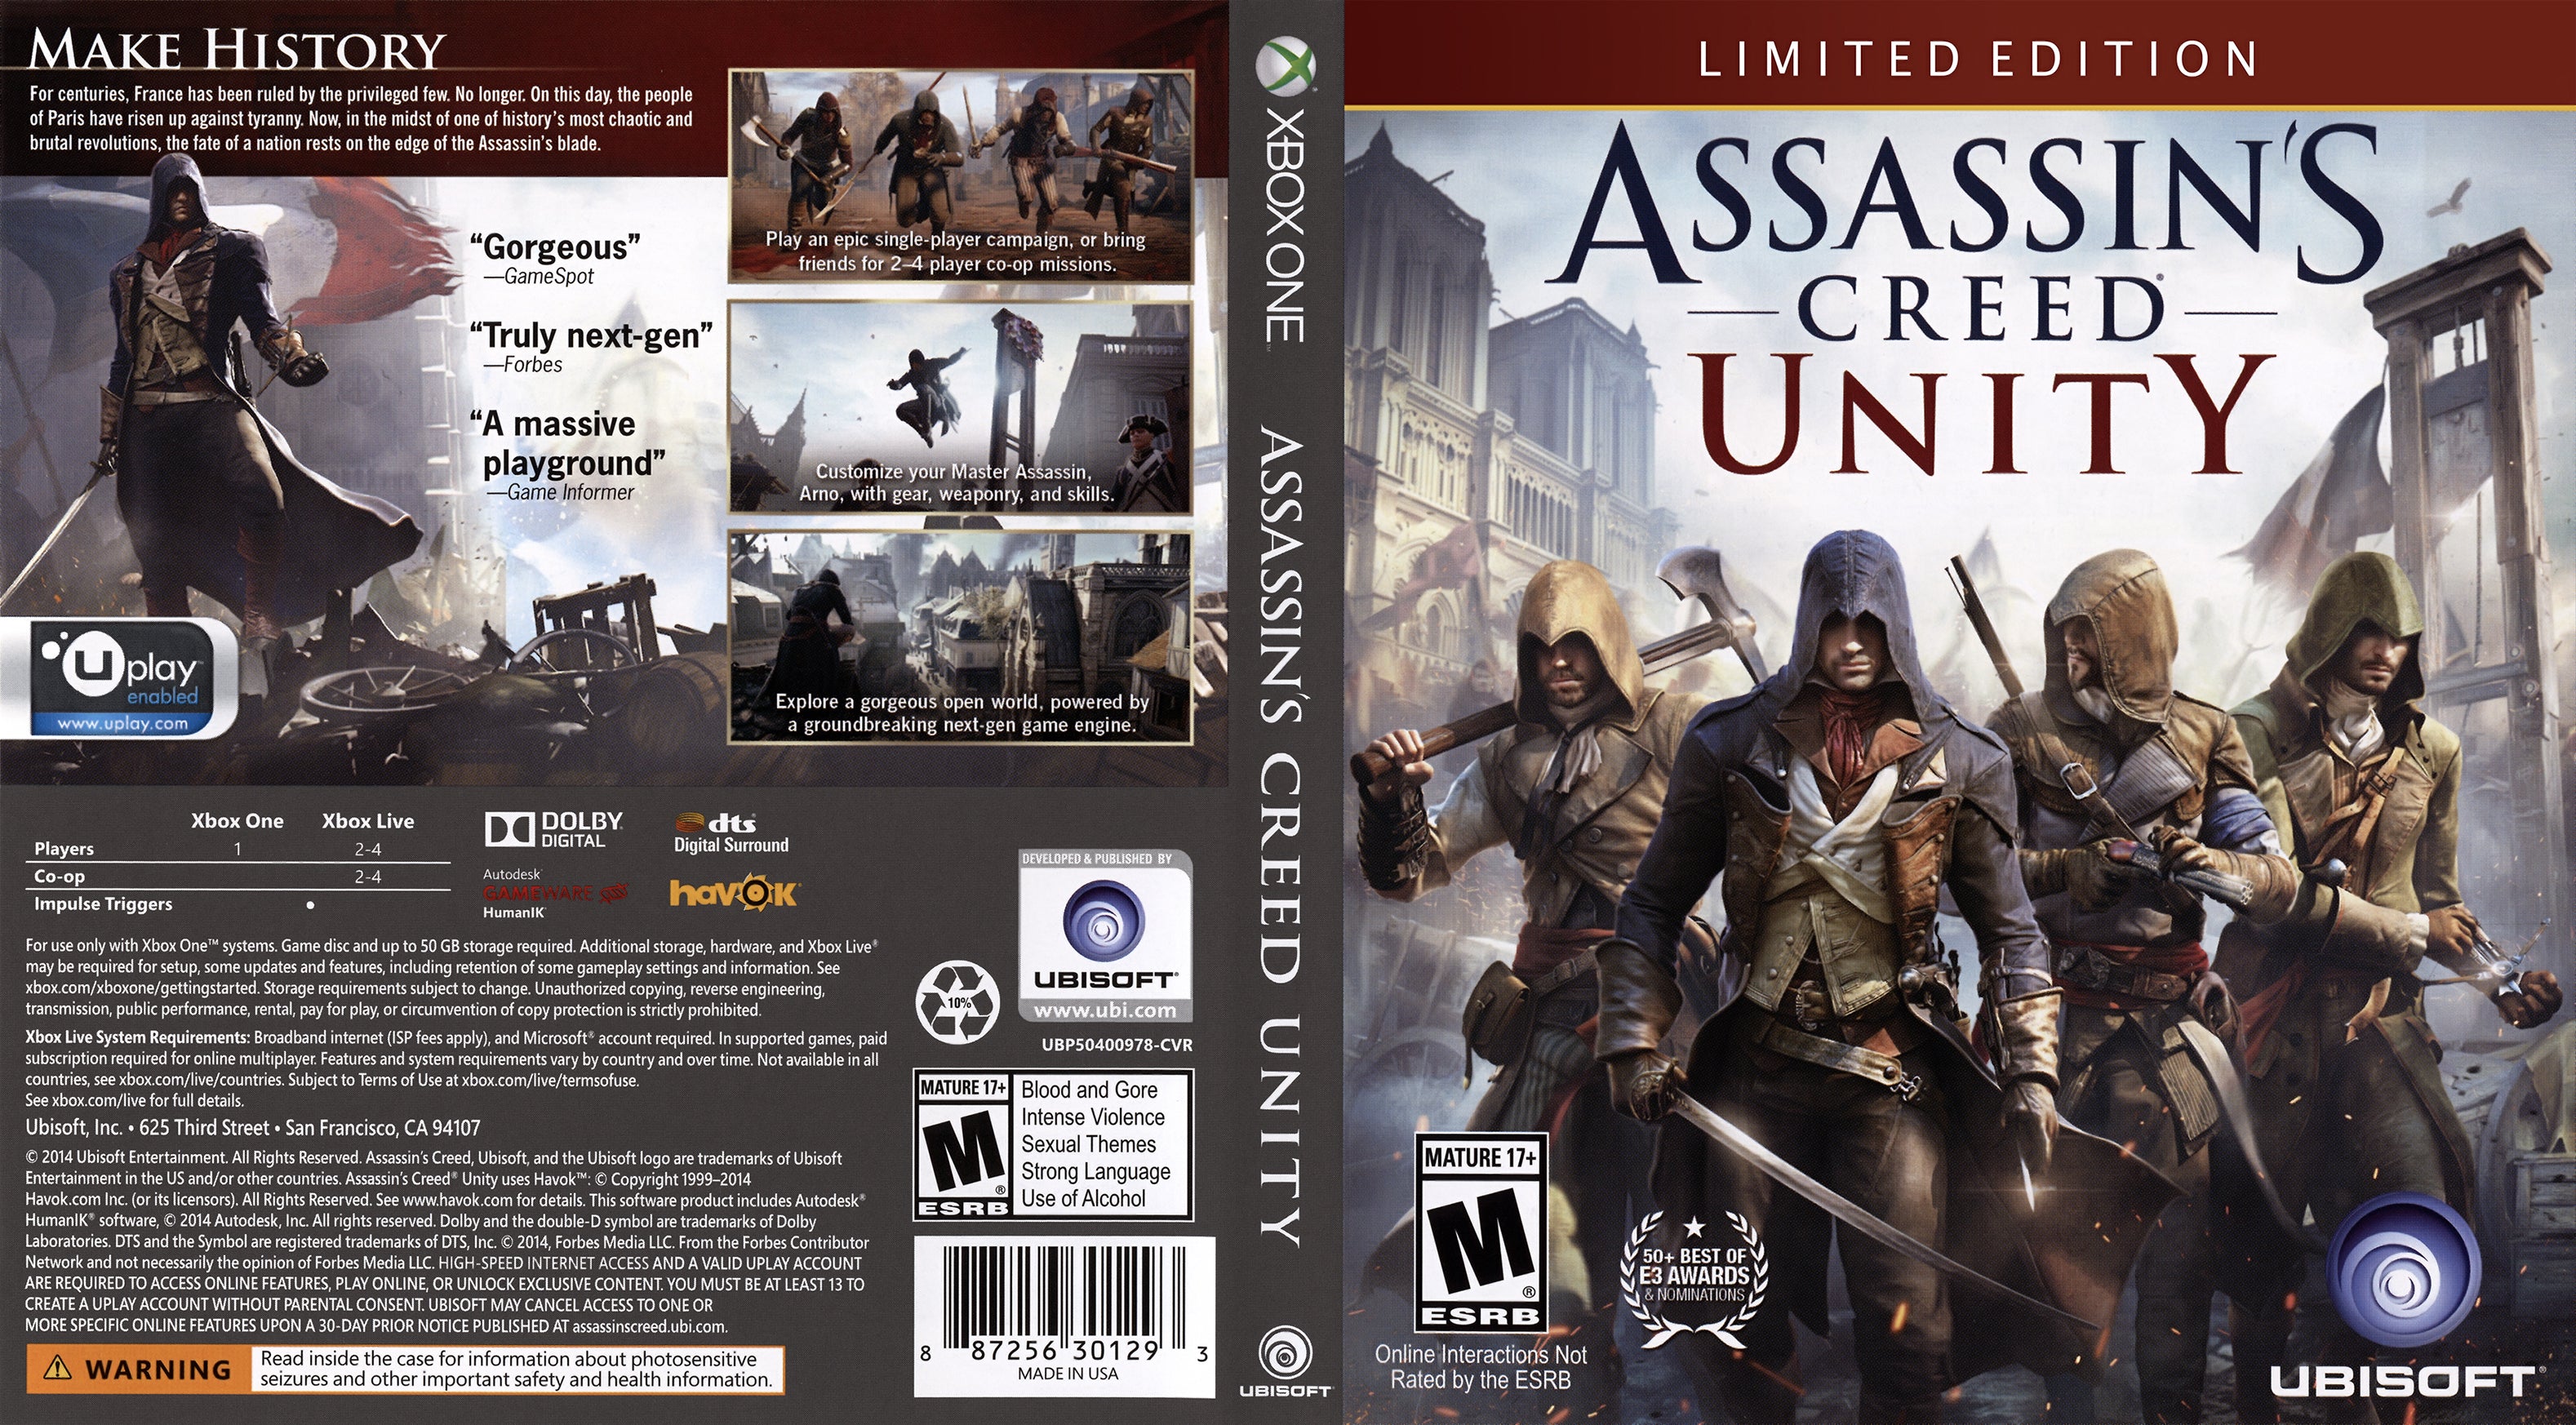 Assassin's Creed: Revelations for Xbox360, Xbox One